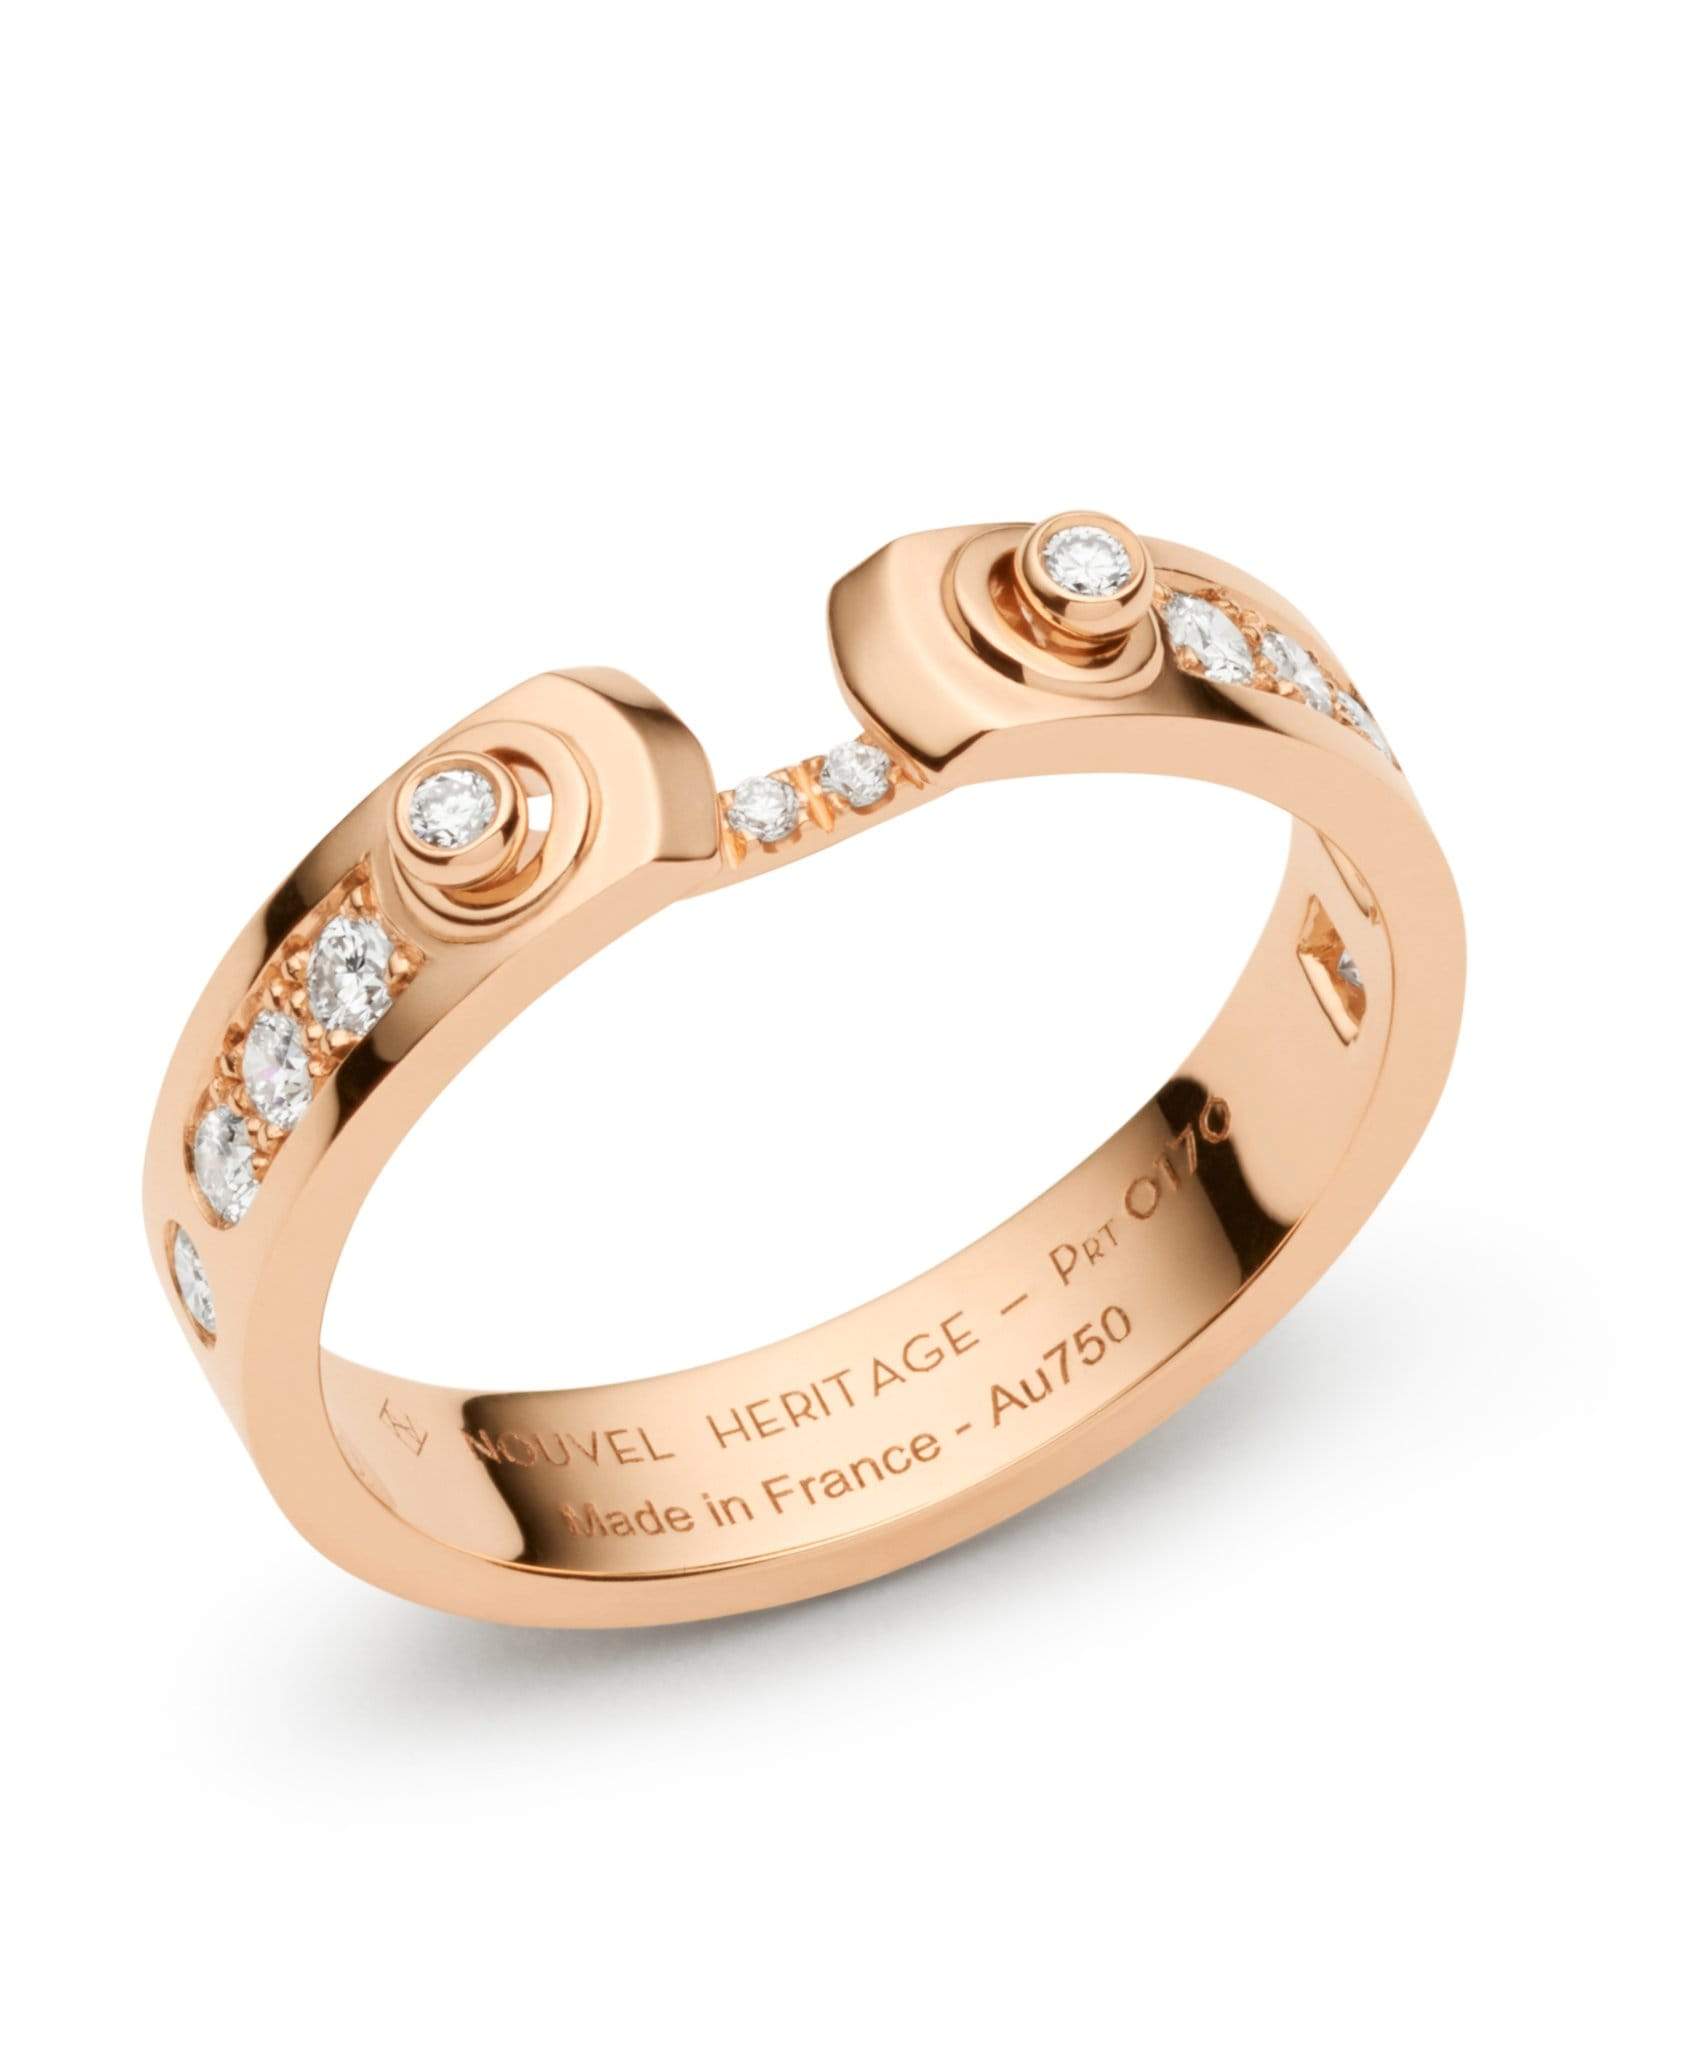 Tuxedo Mood Ring: Discover Luxury Fine Jewelry | Nouvel Heritage || Rose Gold